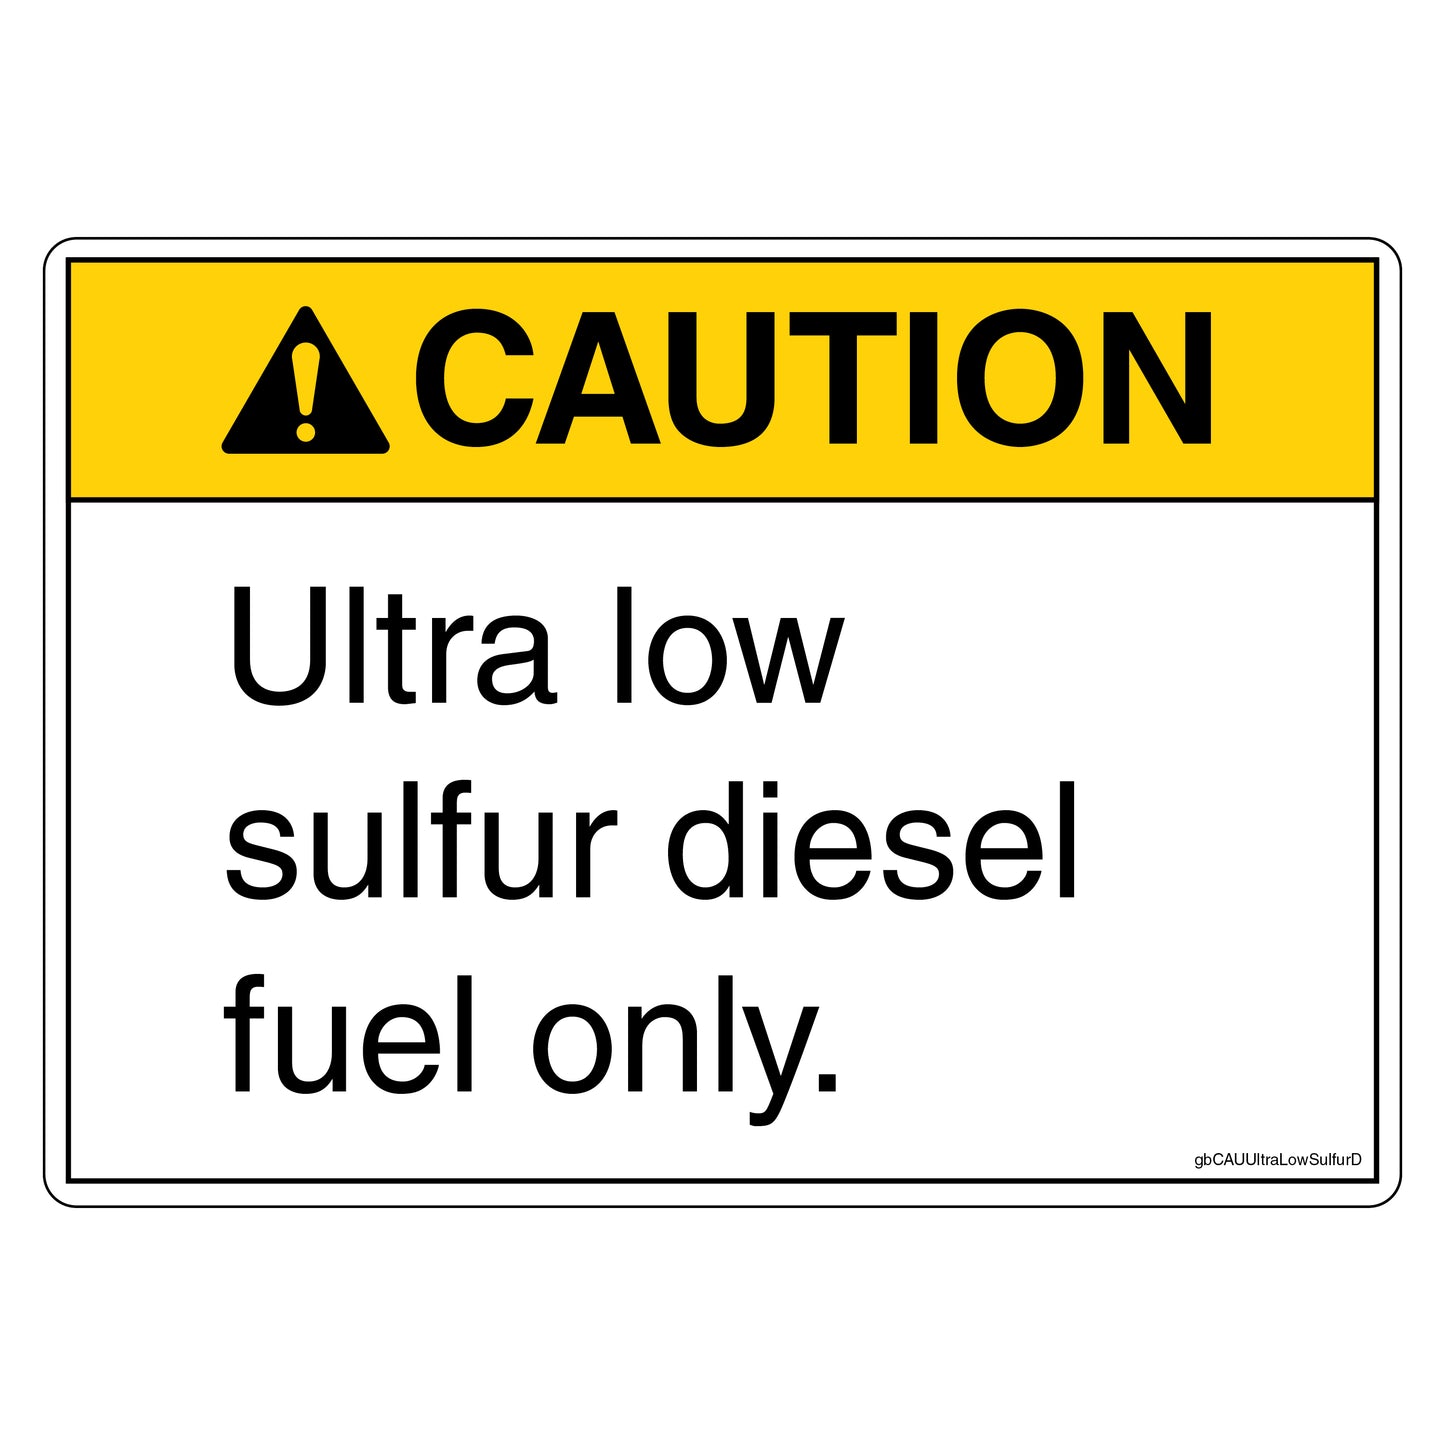 Caution Ultra Low Sulfur Diesel Fuel Only Decal.